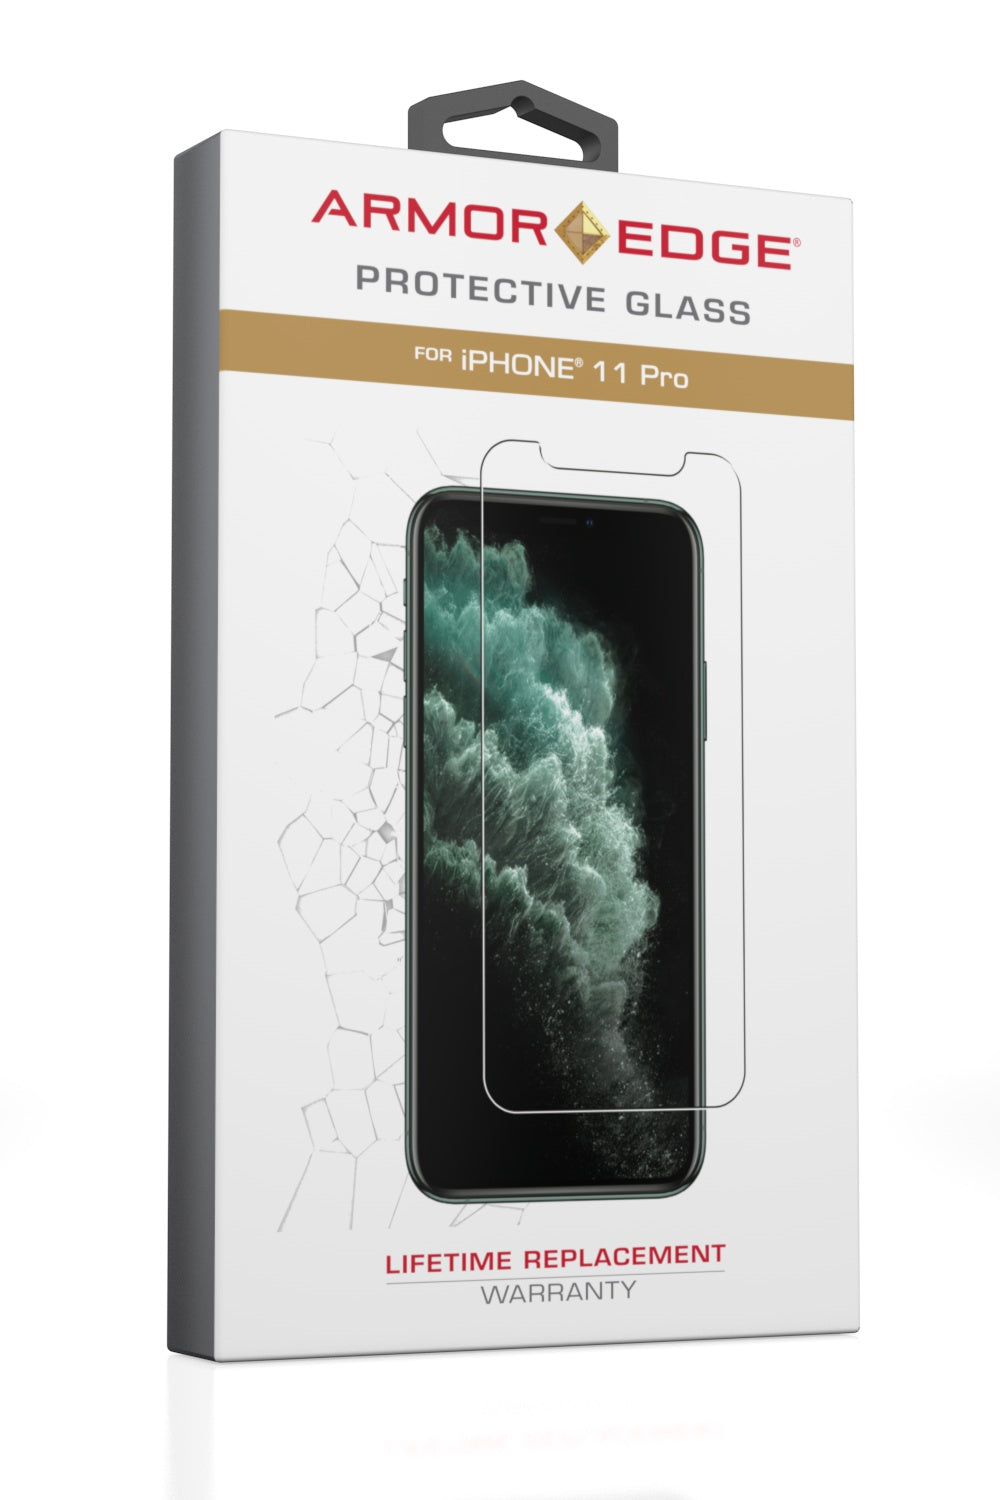 Armor Edge - Protective Glass for iPhone 11 Pro